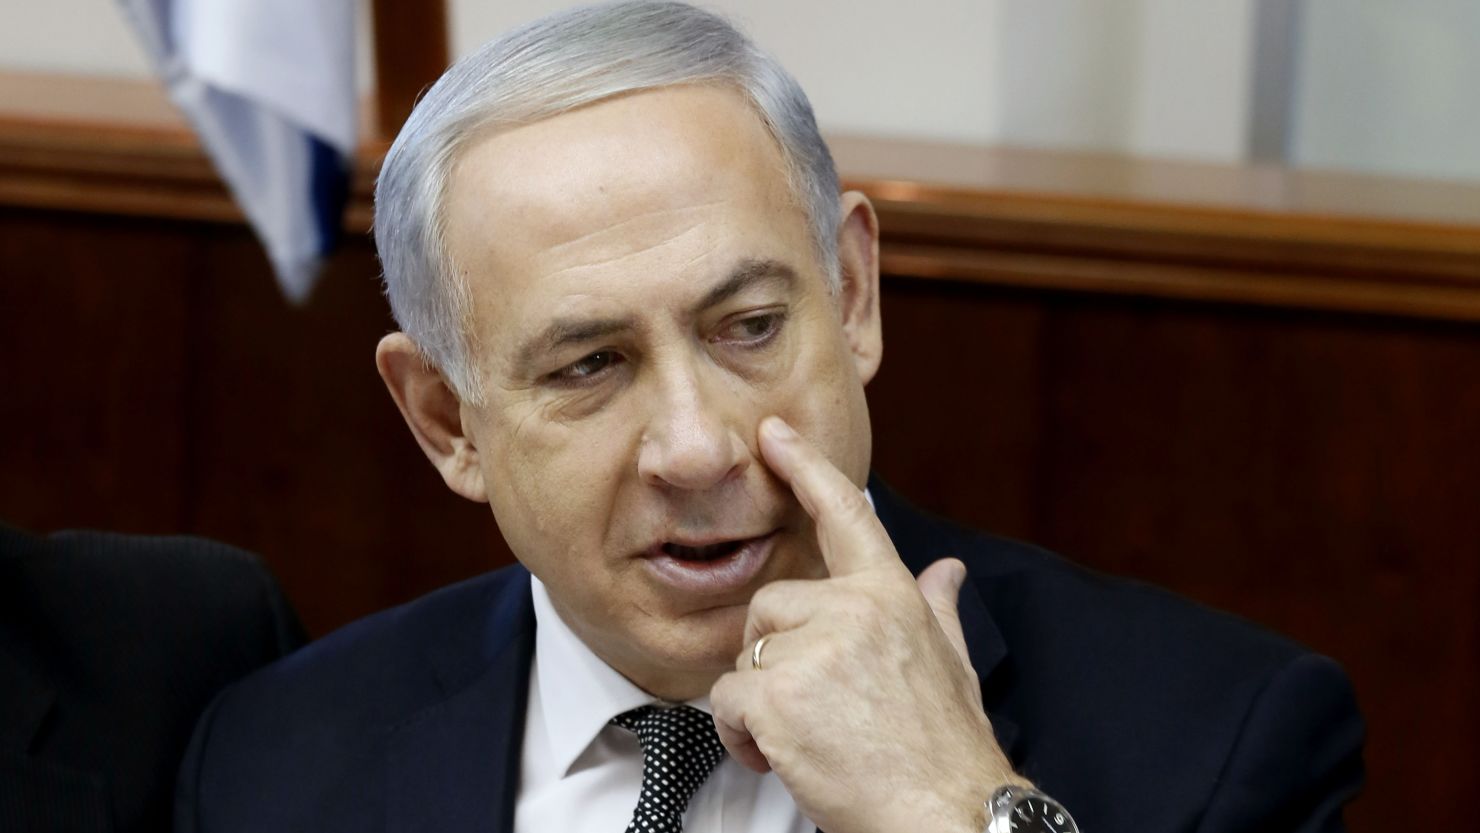 The office of Prime Minister Benjamin Netanyahu said of Tuesday's shooting, "we will not let it go unanswered."